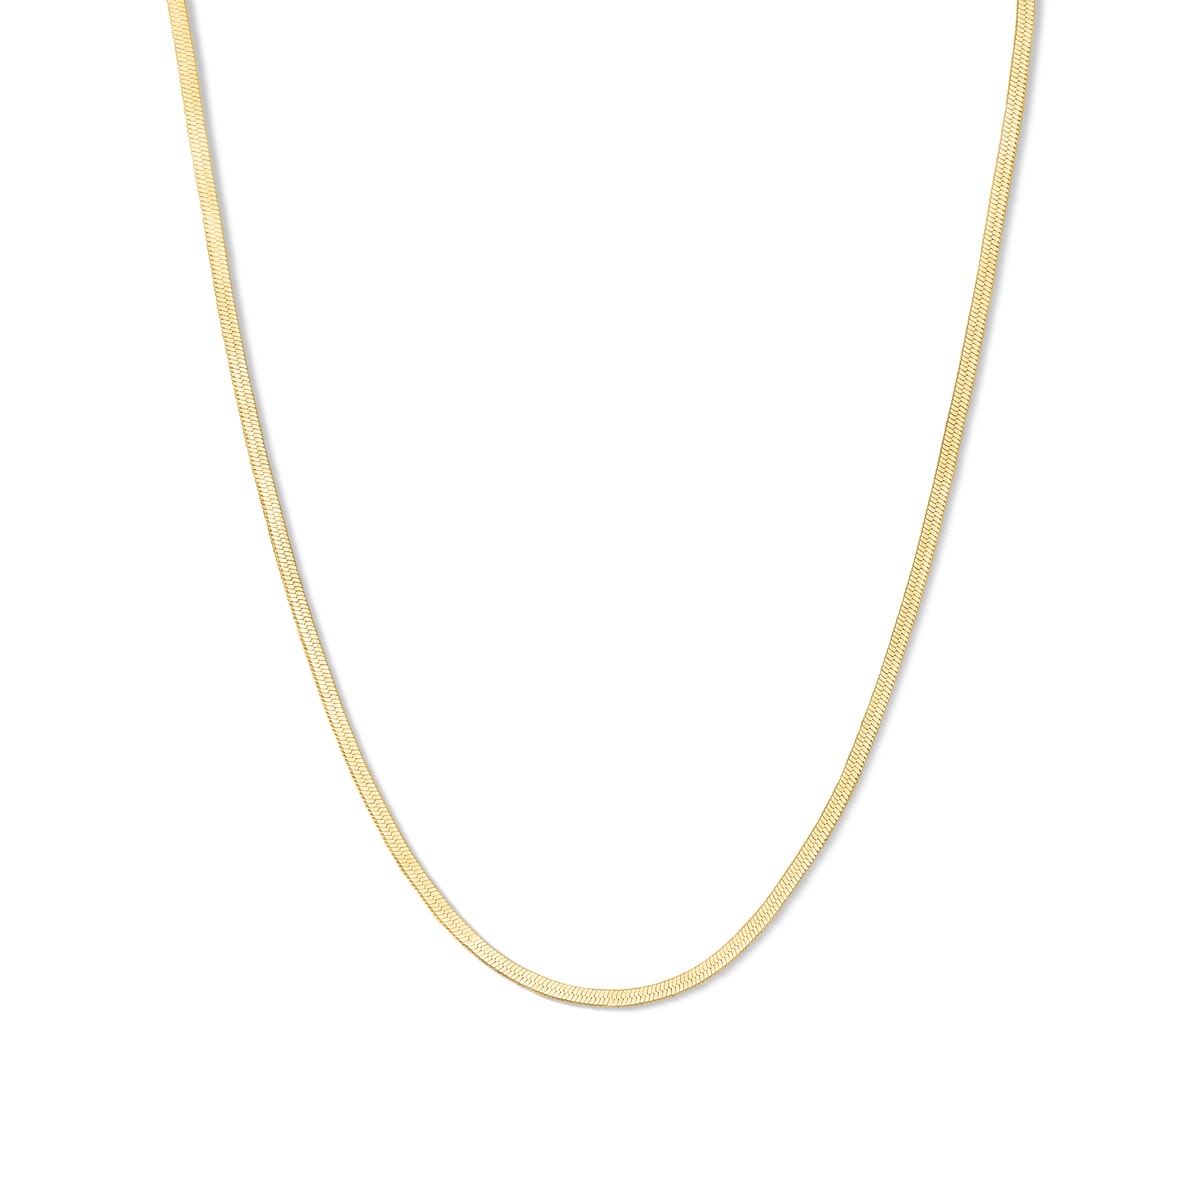 Solid chain necklace in gold